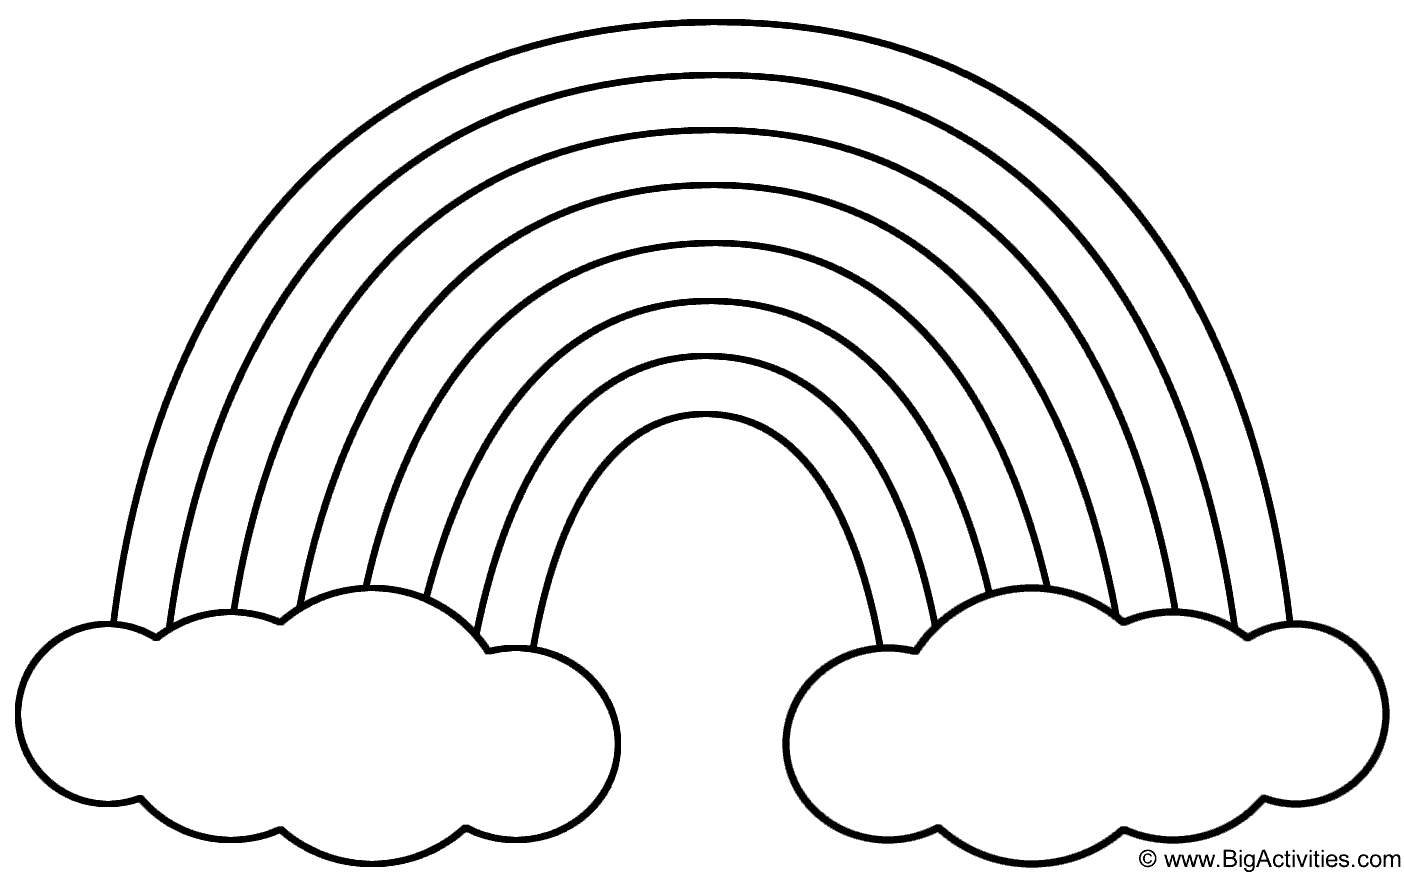 Rainbow with Clouds - Coloring Page (St. Patrick's Day)